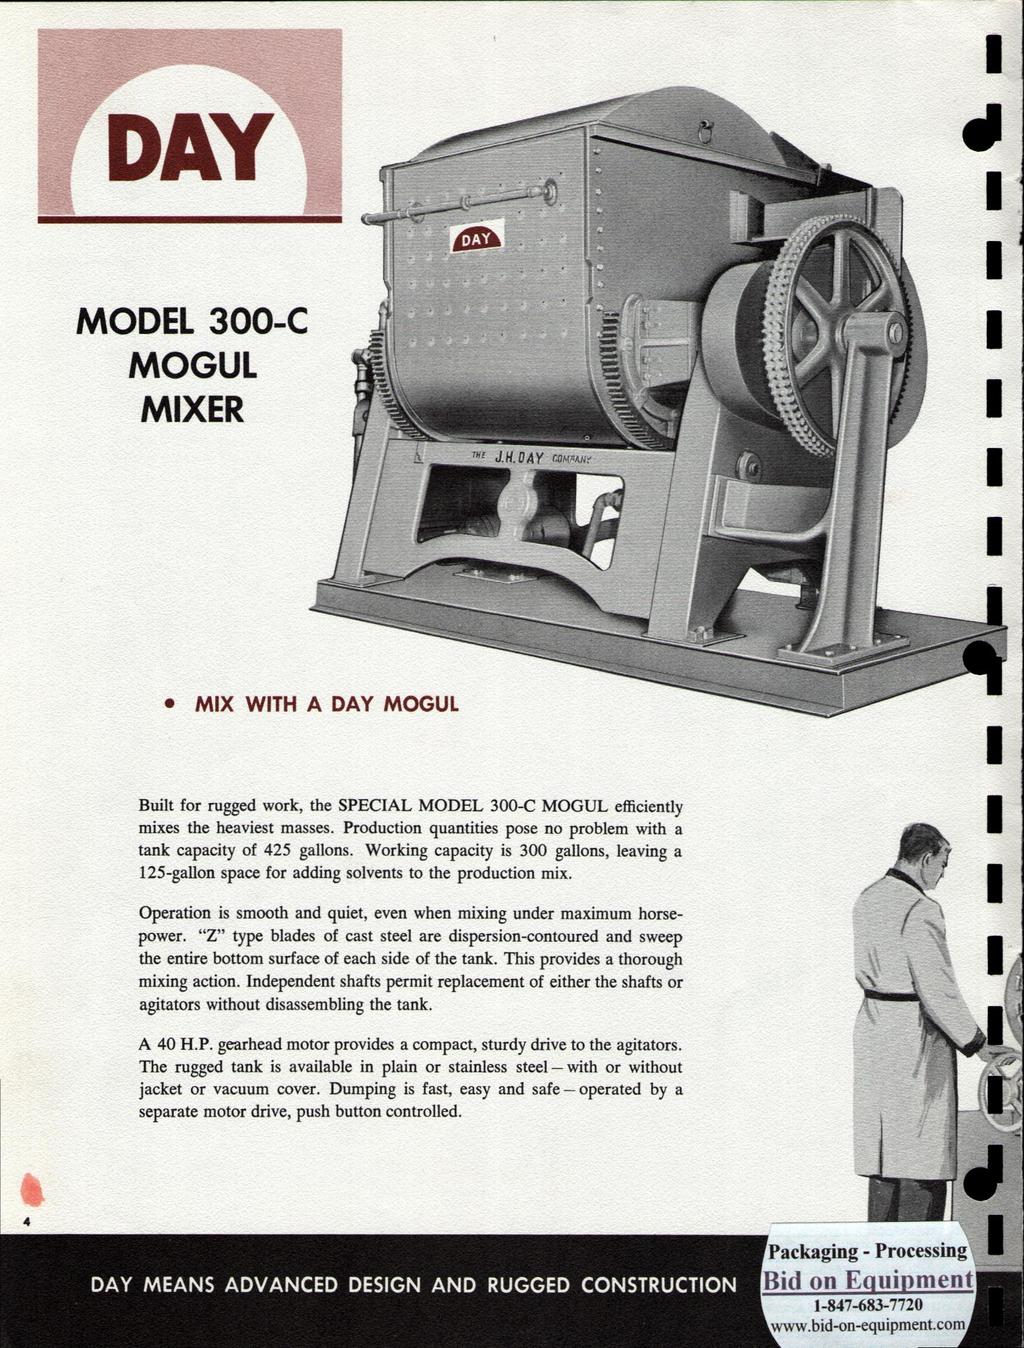 DAY MODEL 300-C MOGUL MIXER MIX WITH A DAY MOGUL Built for rugged work, the SPECIAL MODEL 300-C MOGUL efficiently mixes the heaviest masses.